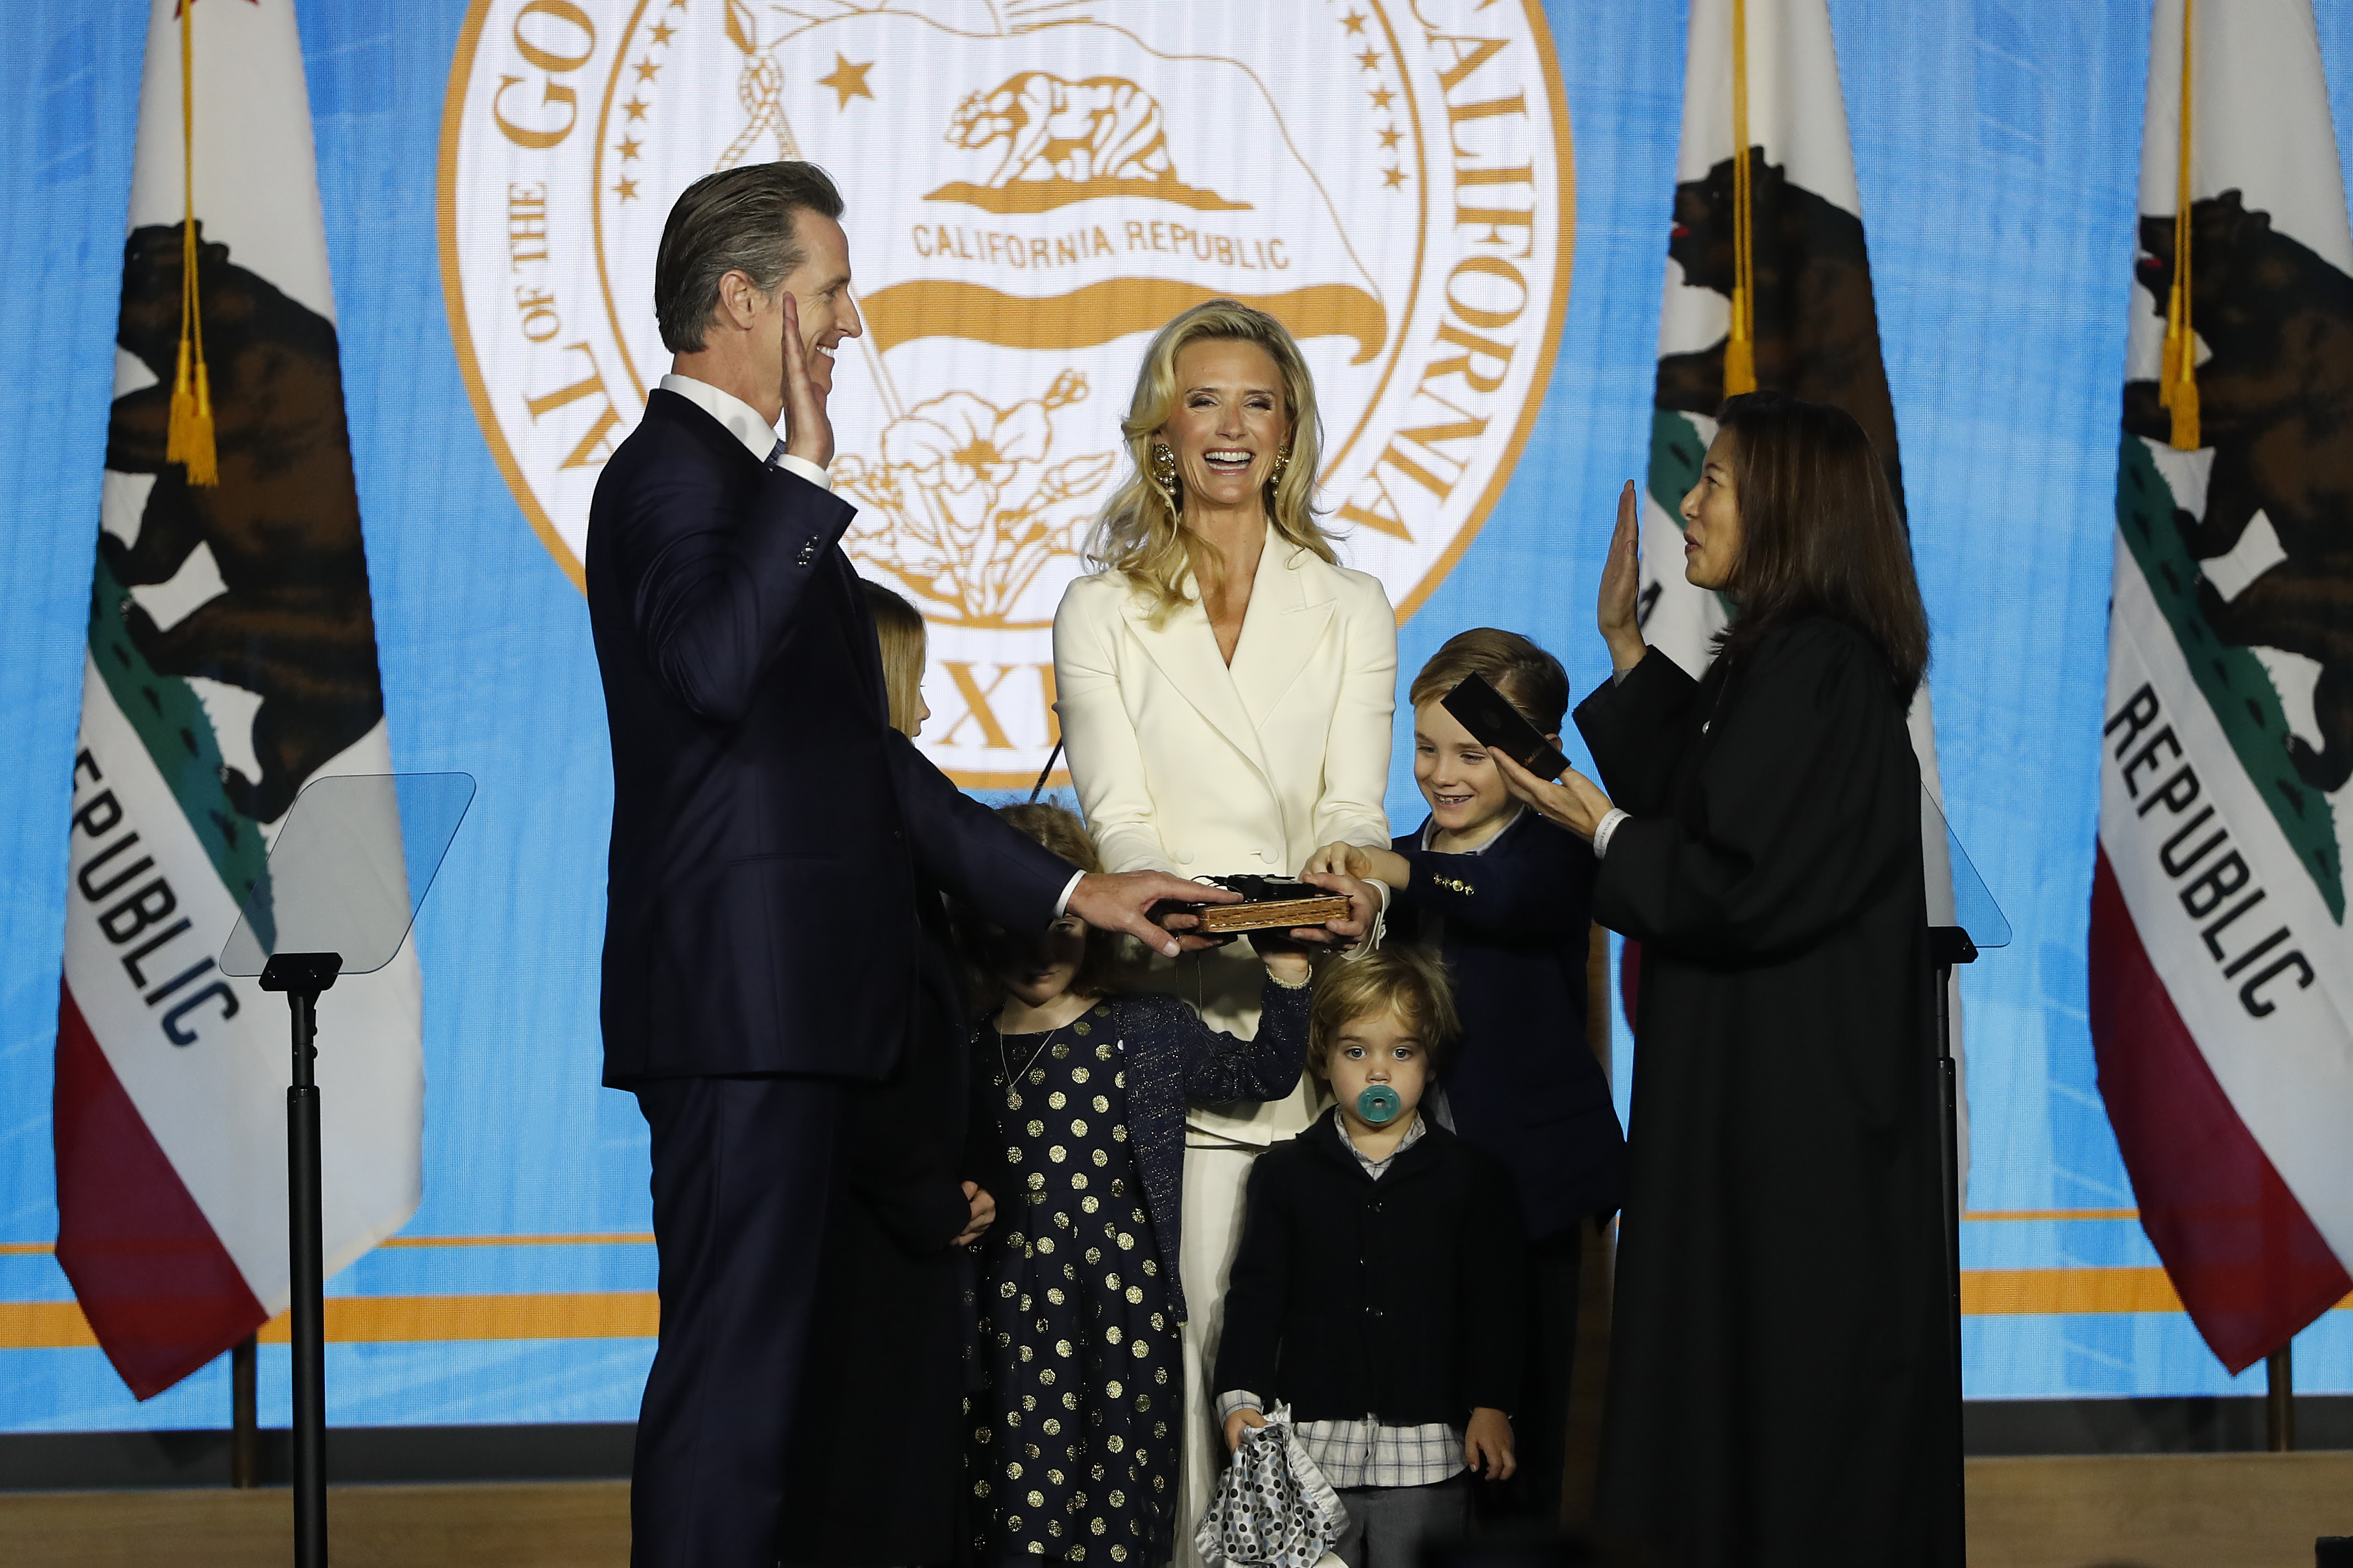 Gavin Newsom (L) is sworn in as governor of California by Calif